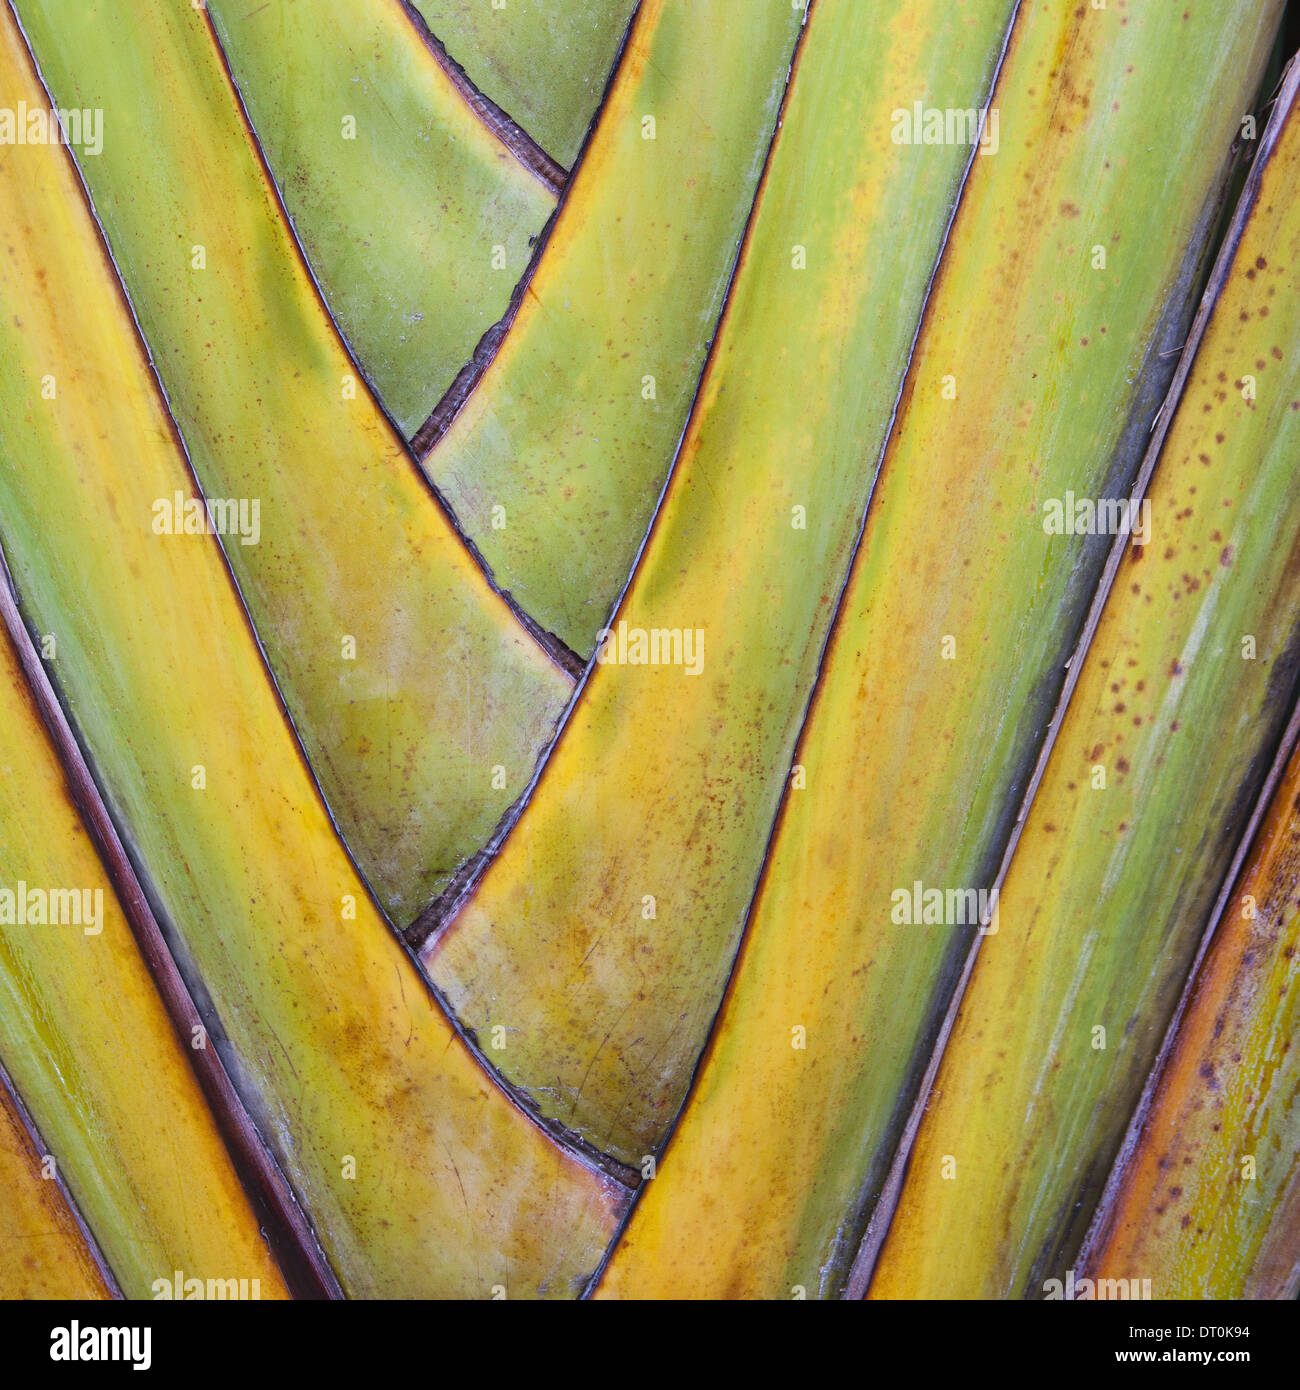 Tulum Mexico. Traveller's Palm or fan palm tree leaf stems Stock Photo